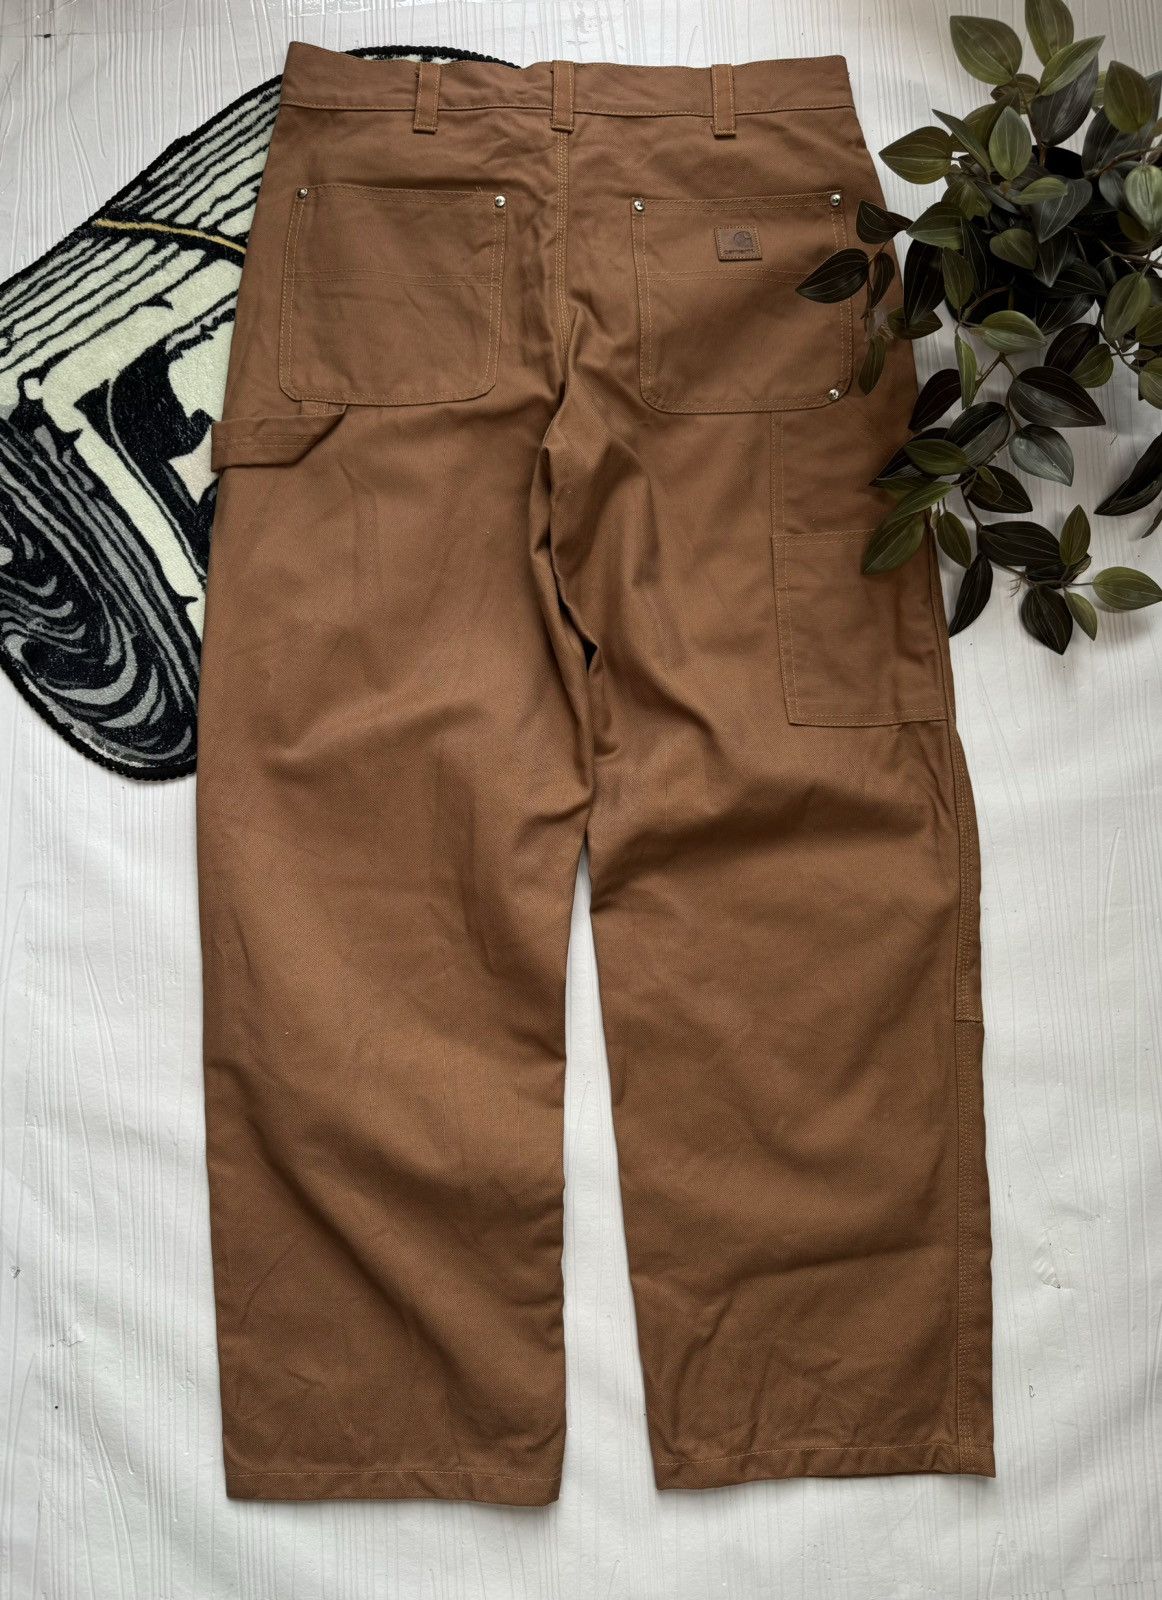 Pre-owned Carhartt X Made In Usa Vintage Carhartt Pants Made In Mexico Workwear In Brown